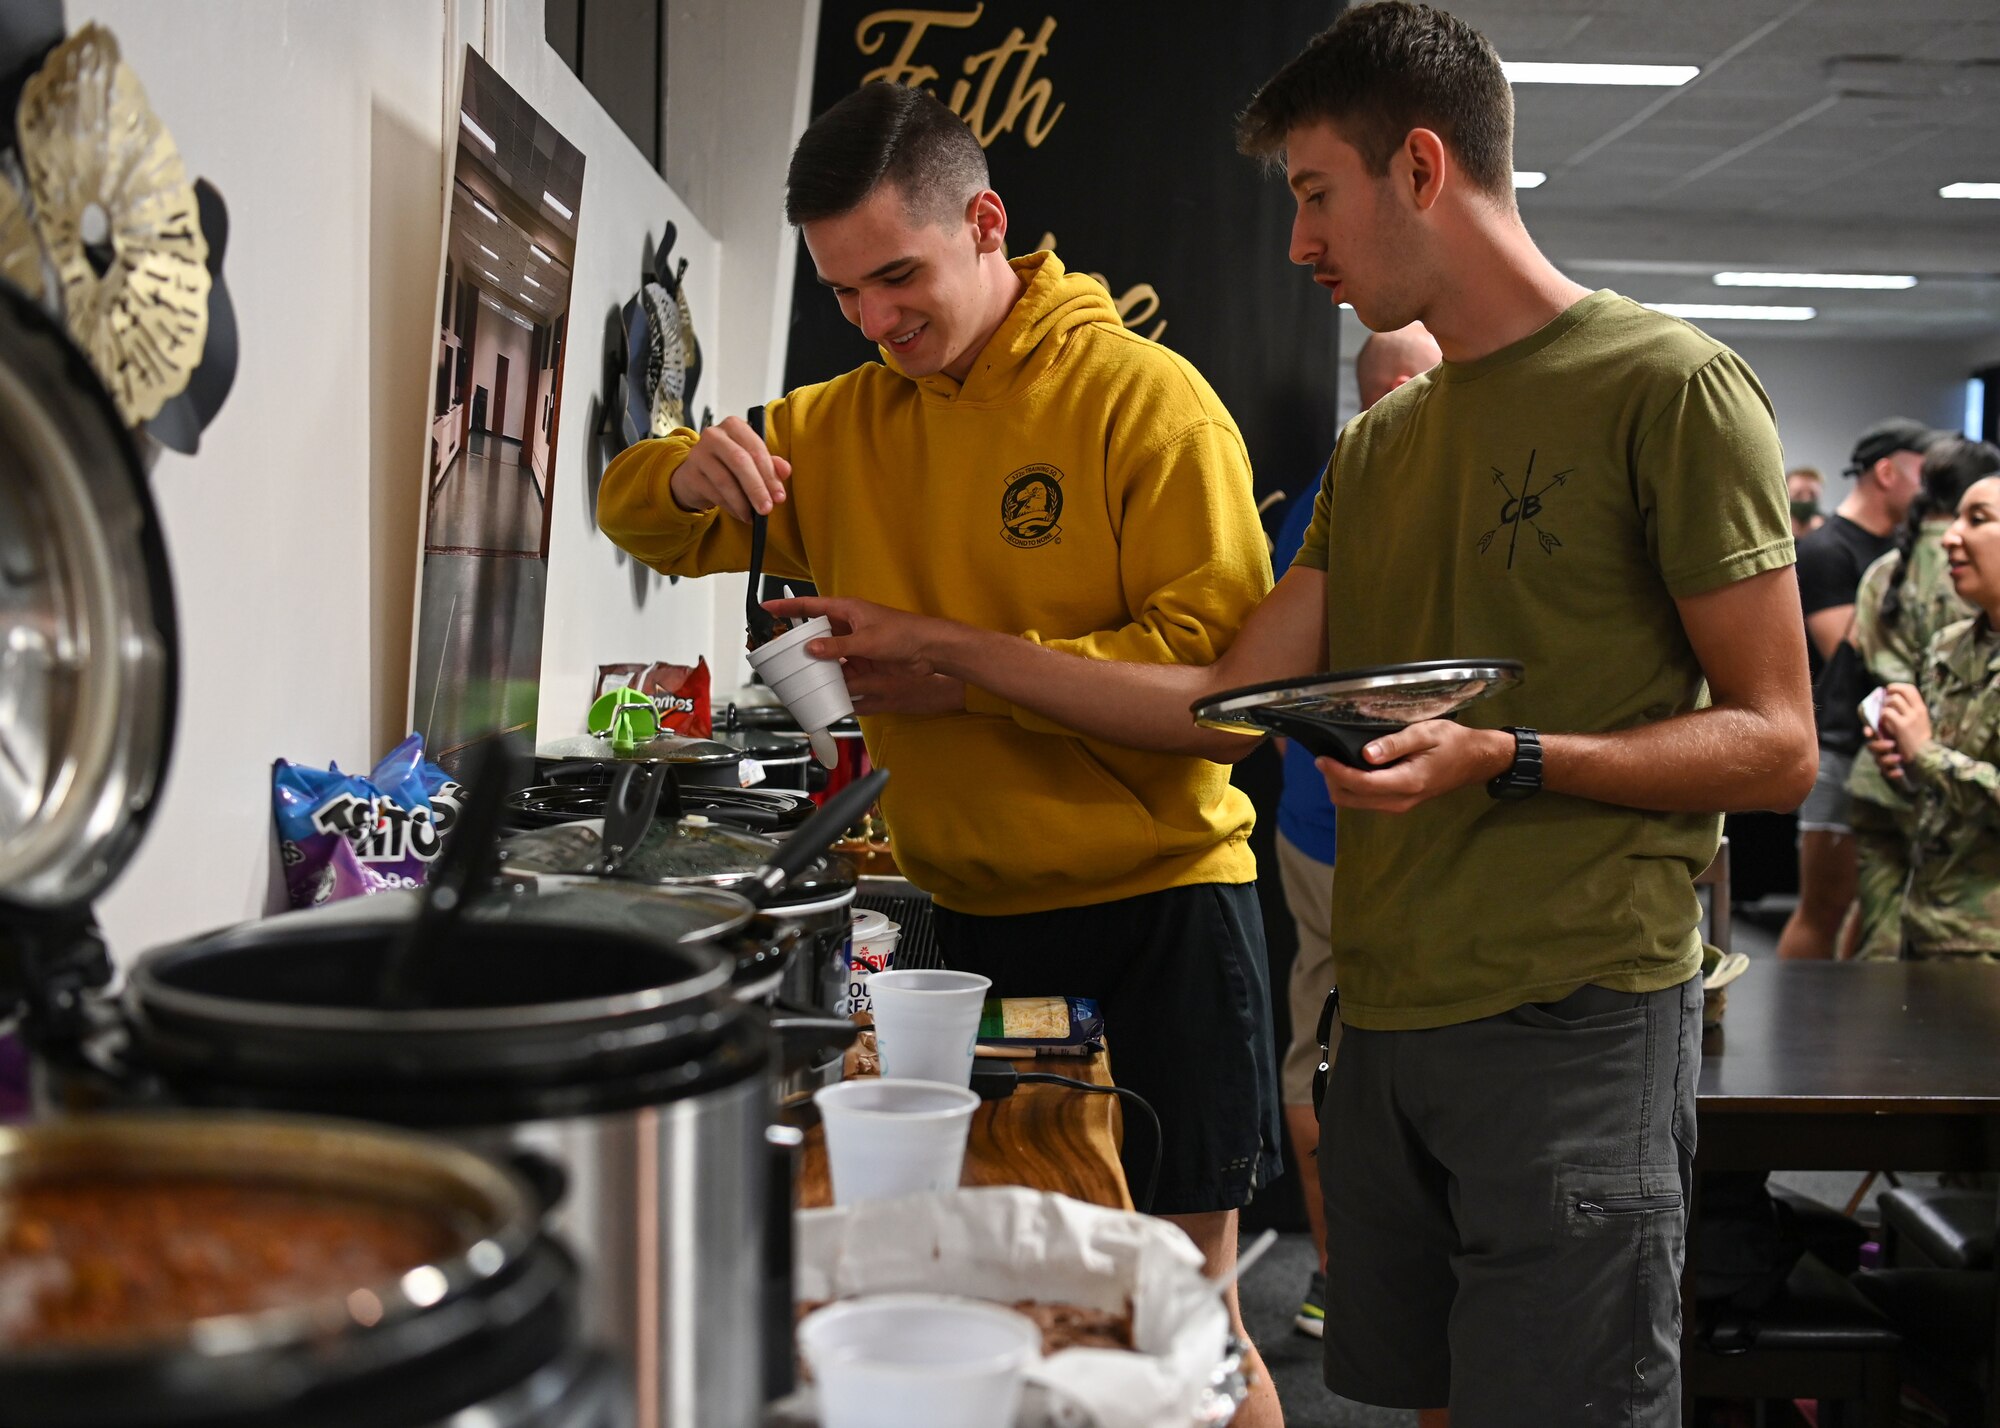 Two U.S. Air Force Airmen assigned to Andersen Air Force Base, Guam, get a scoop of chili during a chili cook off at an opening ceremony of an Airmen’s Center at Chapel 1, Andersen Air Force Base, Guam, Dec. 15, 2021. Members from the chapel team and dorm residents worked for months reconstructing an empty space to operationalize a piece of the chapel to be Airmen focused. (U.S. Air Force photo by Senior Airman Aubree Owens)